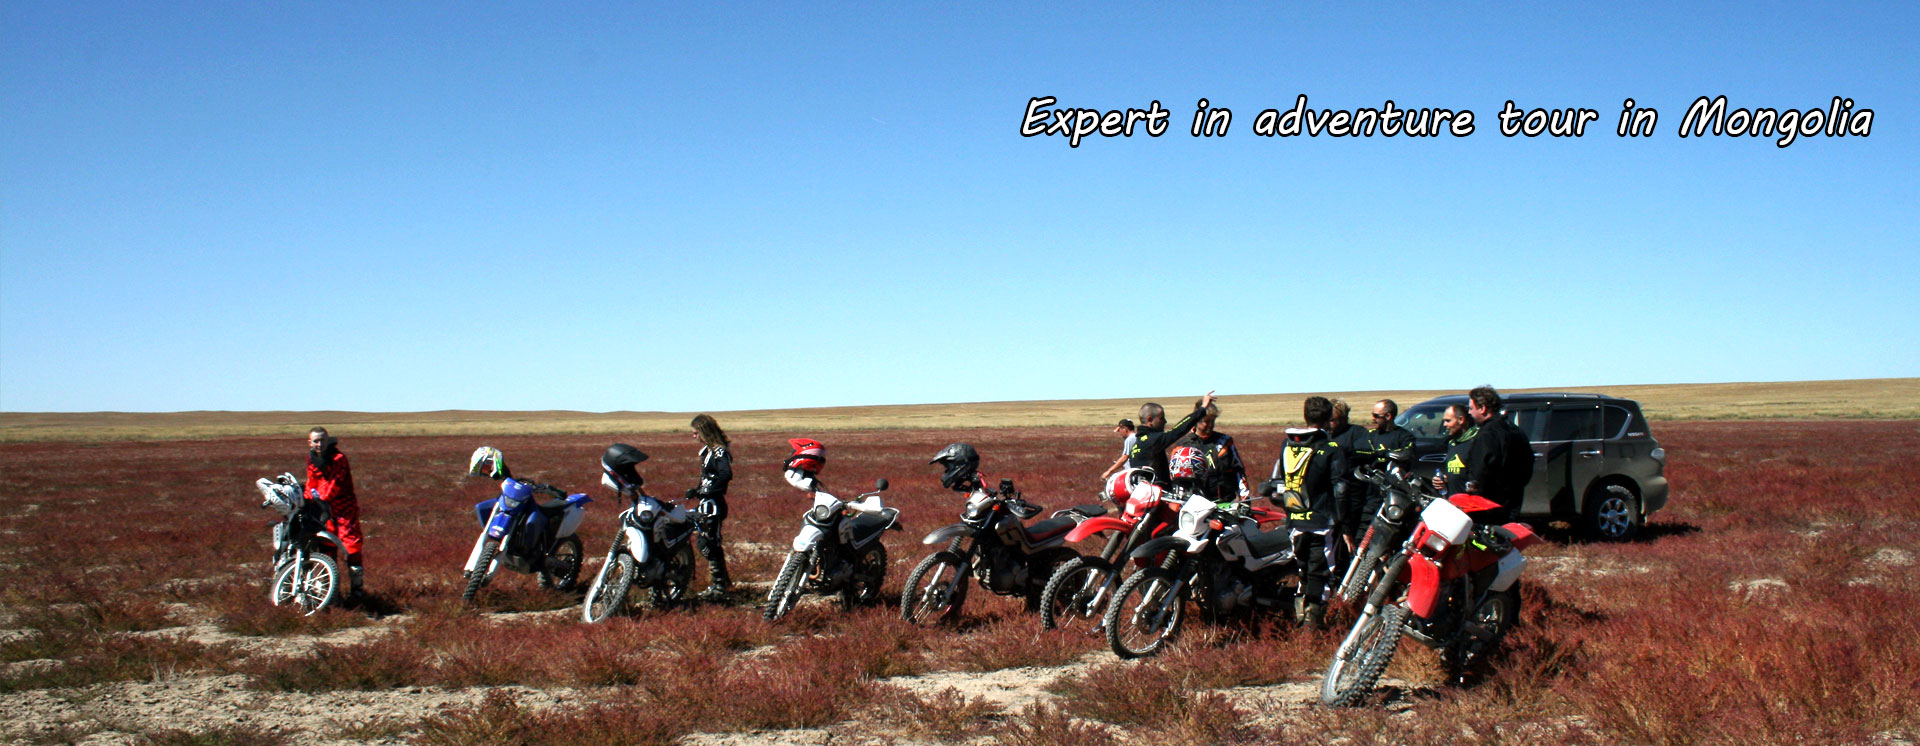 motorcycle-tour-in-steppe-mongolia.jpg